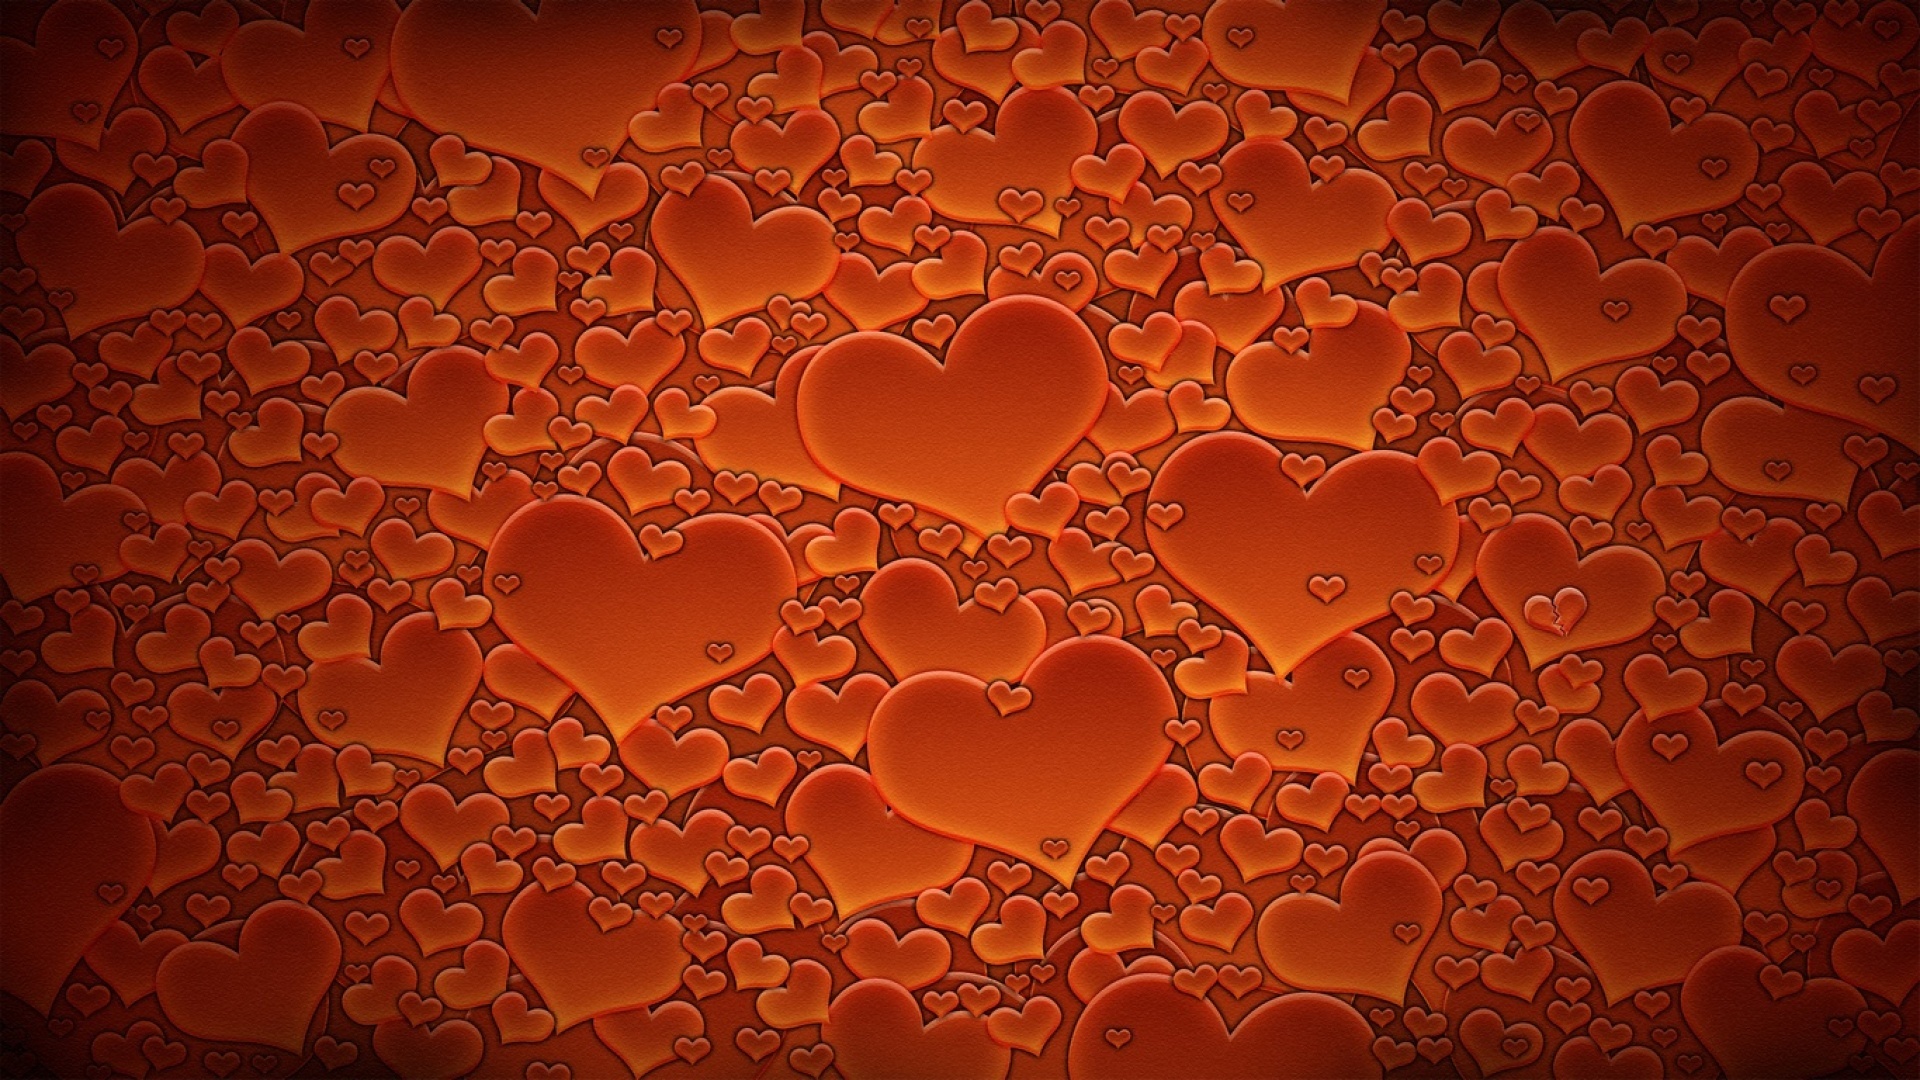 New Lock Screen Wallpapers background, hearts, red